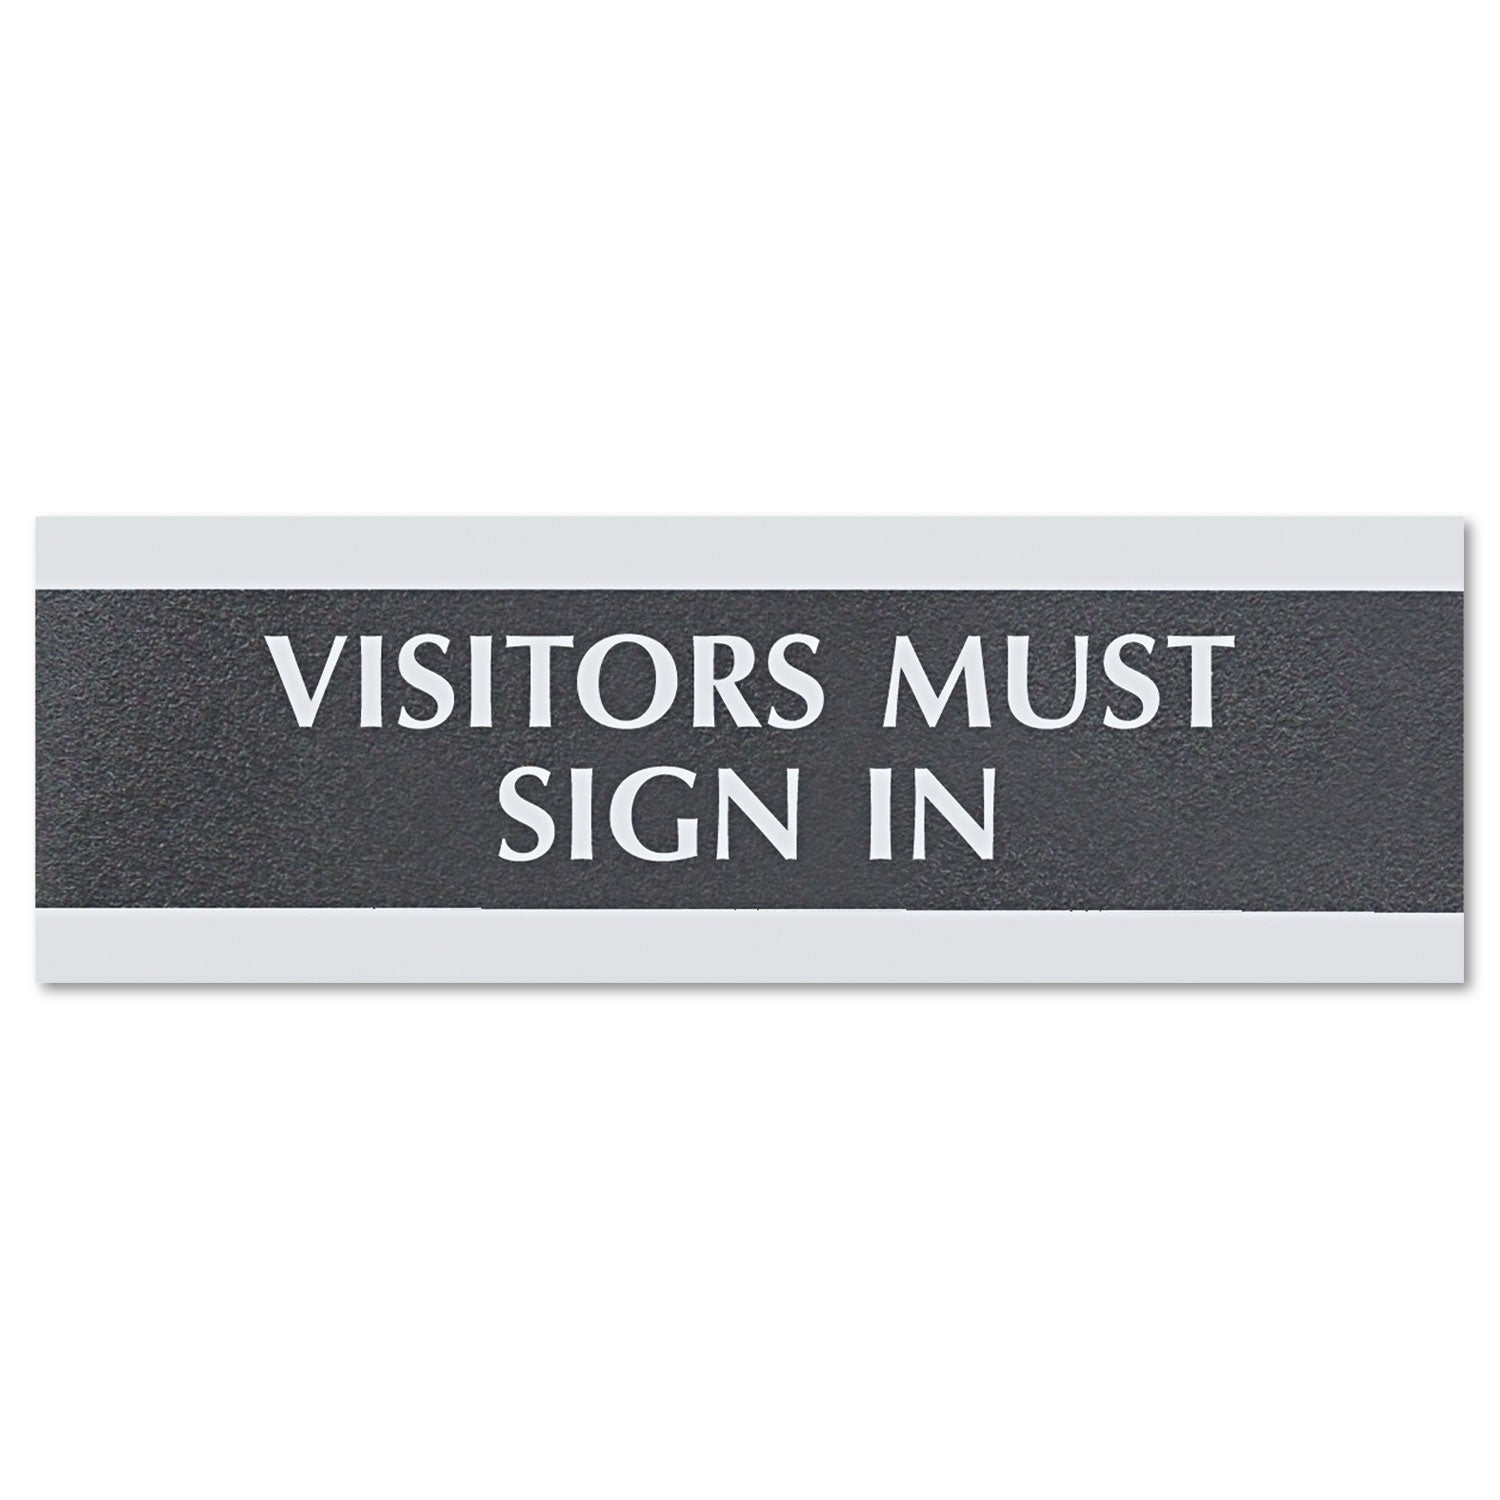 Century Series Office Sign, VISITORS MUST SIGN IN, 9 x 3, Black/Silver - 